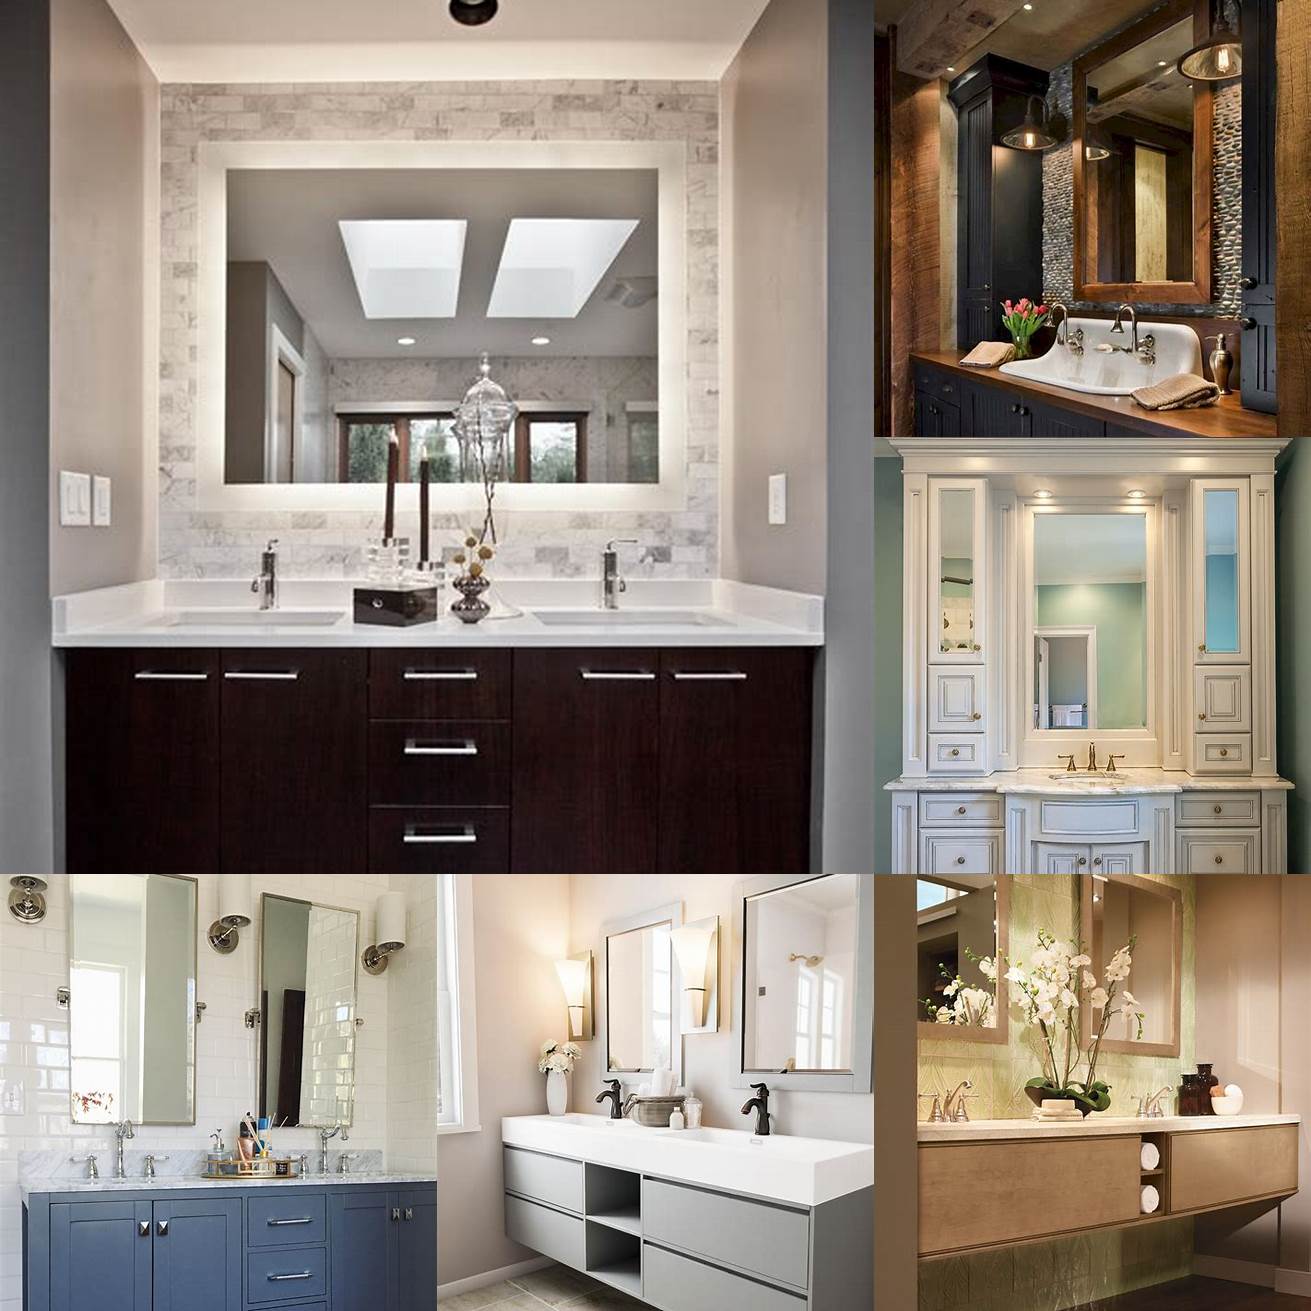 Style Choose a vanity that matches your personal style and the overall decor of your bathroom